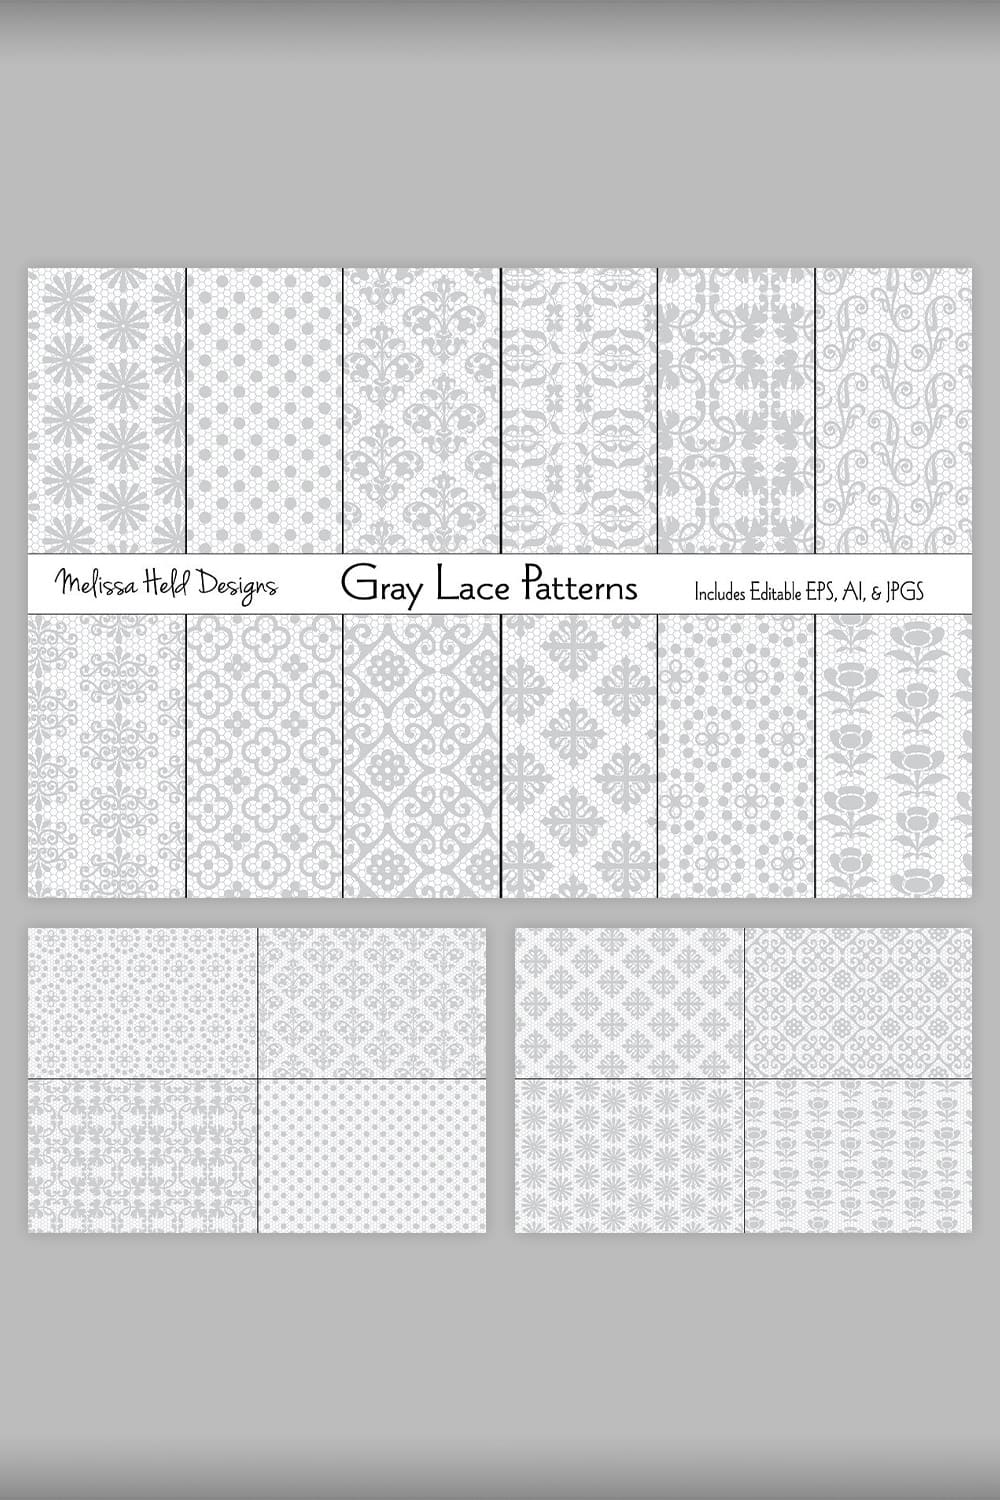 Gray Lace Patterns Preview.